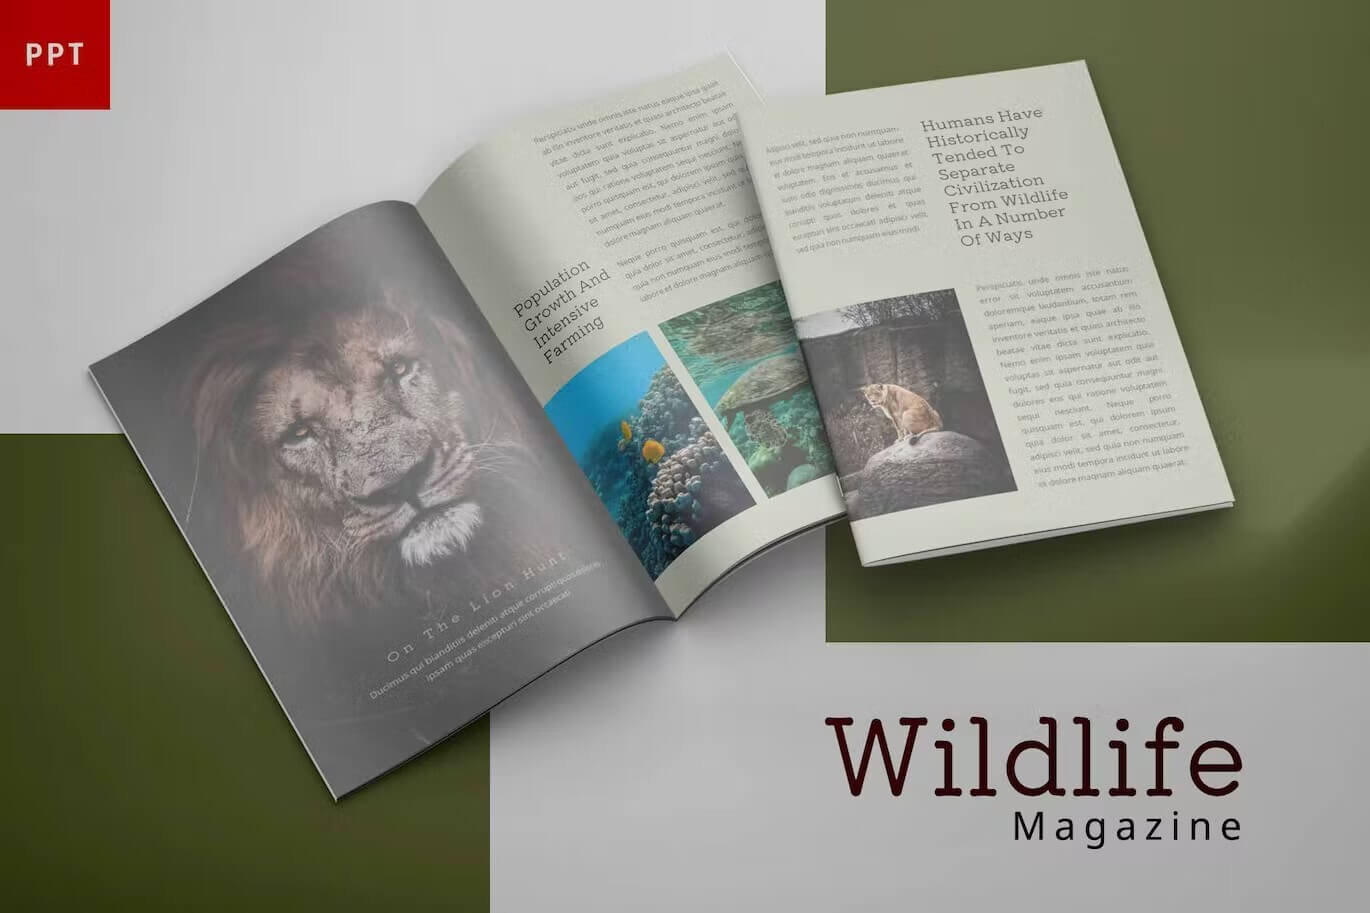 Wildlife magazine on the grey and green backgrounds.